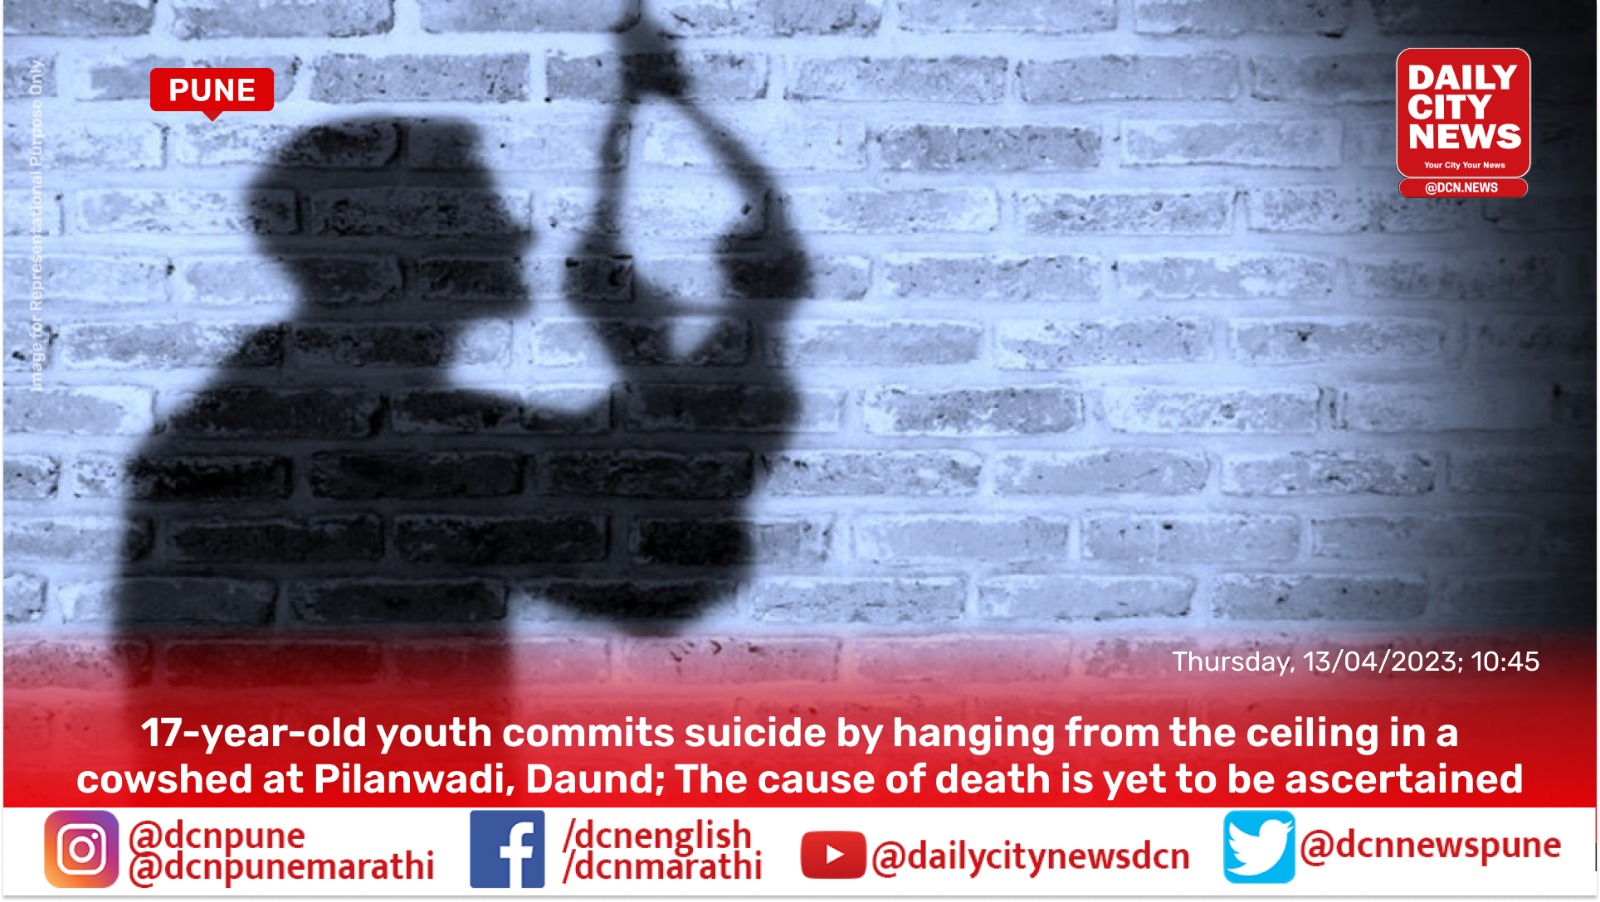 17-year-old youth commits suicide by hanging from the ceiling in a cowshed at Pilanwadi, Daund; The cause of death is yet to be ascertained